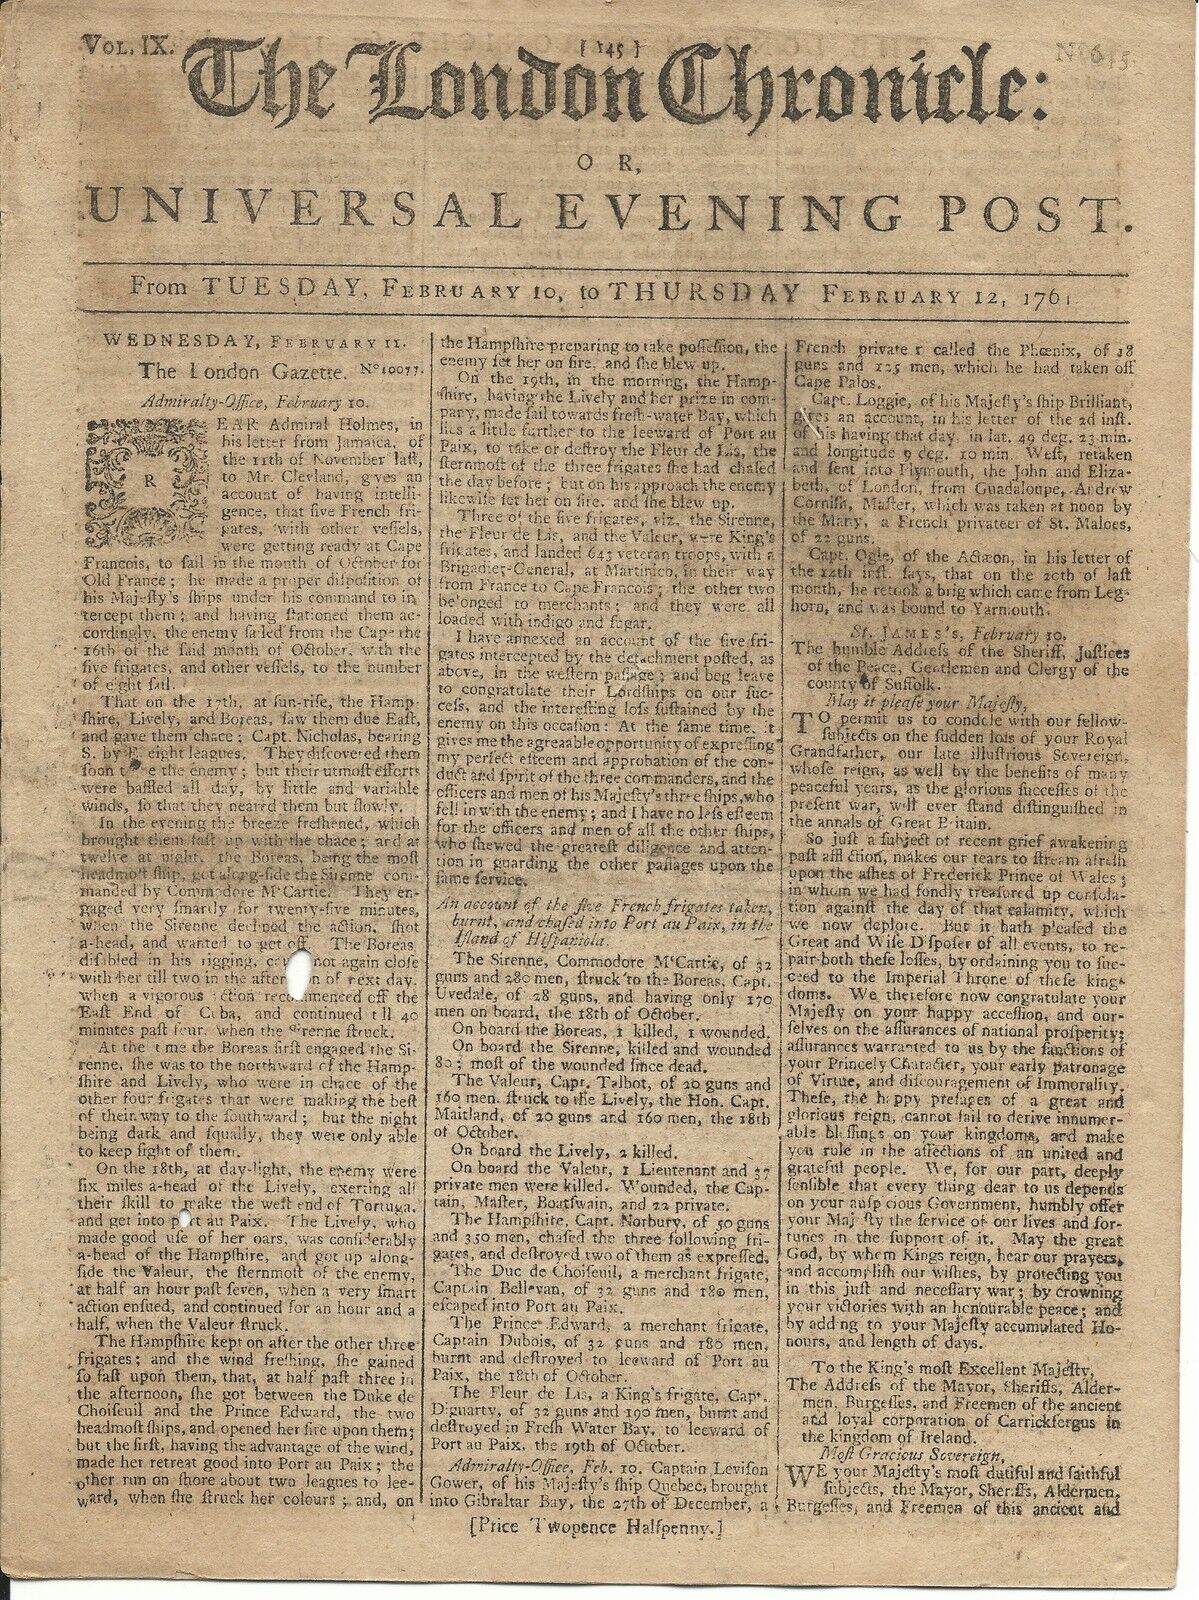 The London Chronicle or Universal Evening Post- Feb. 1761- 8 Pages^